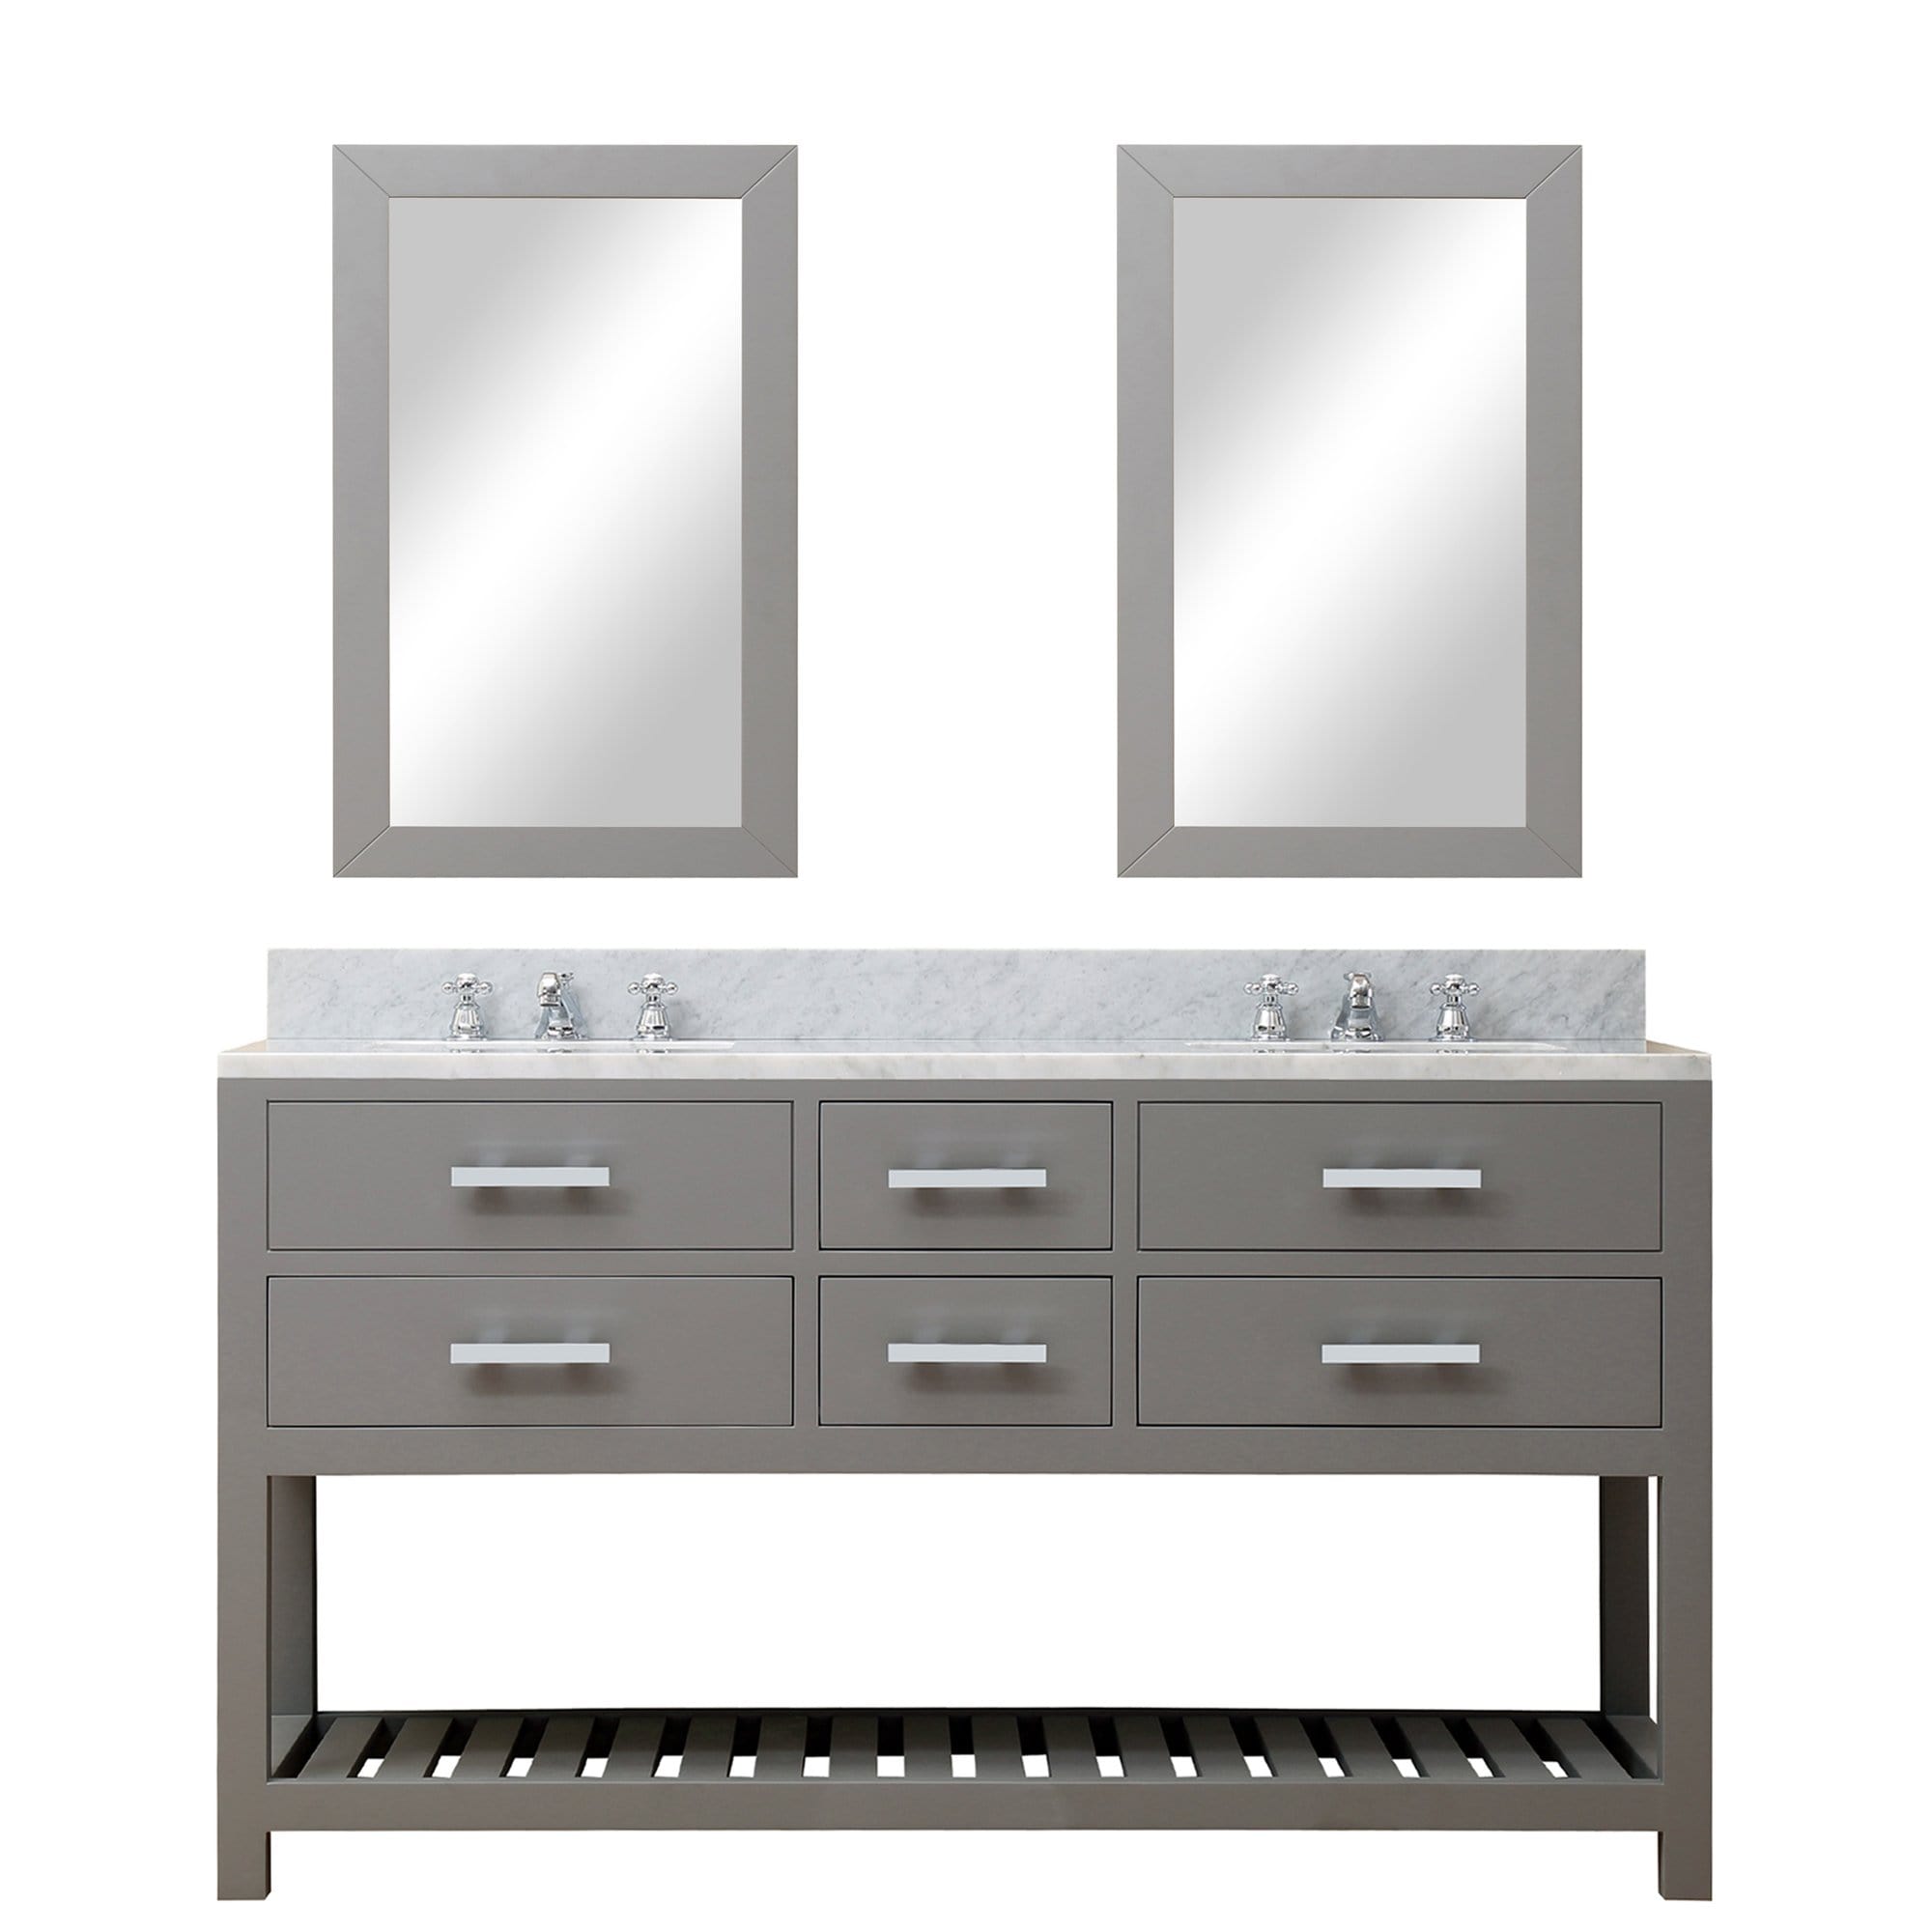 Water Creation 60 Inch Cashmere Grey Double Sink Bathroom Vanity With 2 Matching Framed Mirrors And Faucets From The Madalyn Collection - Molaix700621683285Bathroom vanityMA60CW01CG-R21BX0901